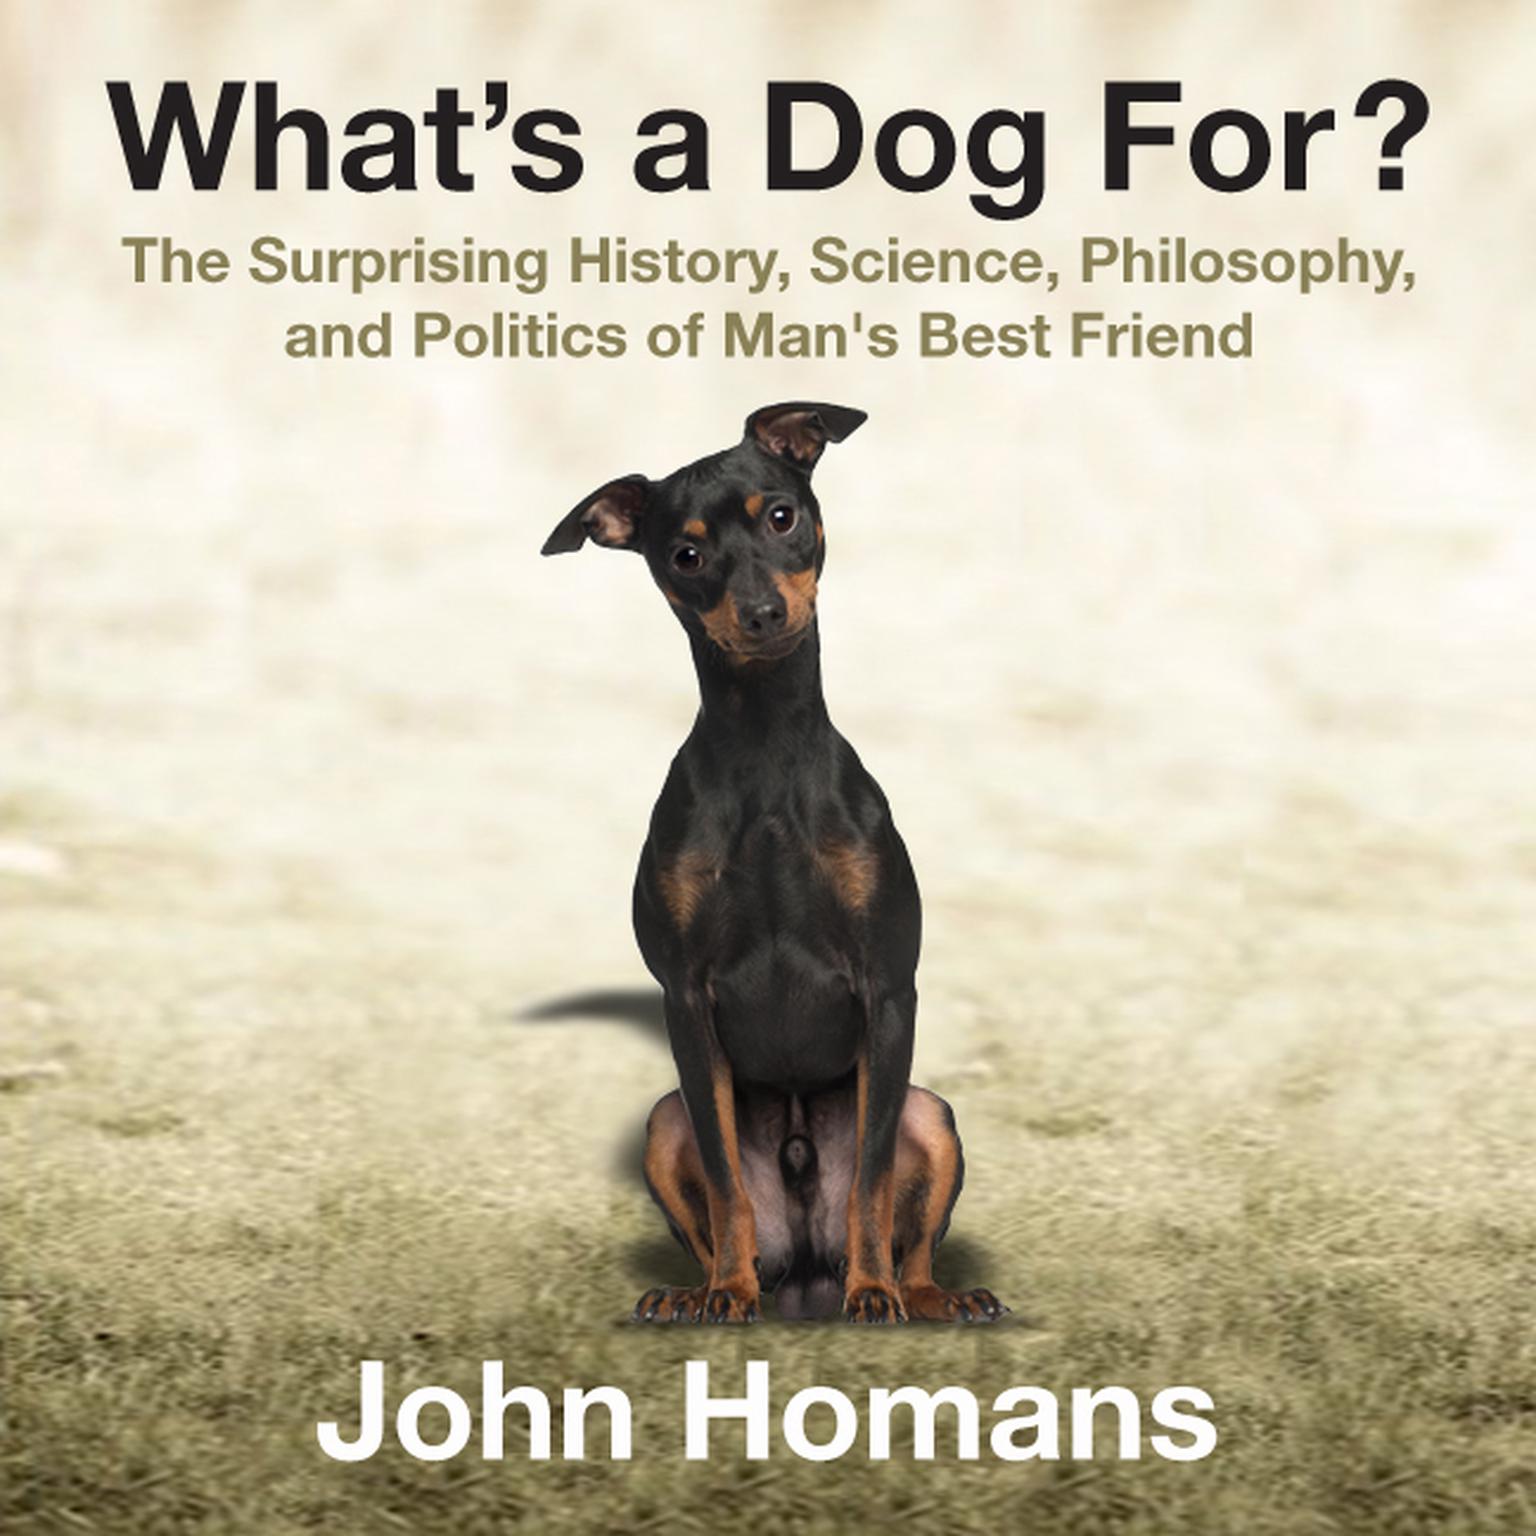 Whats a Dog For?: The Surprising History, Science, Philosophy, and Politics of Mans Best Friend Audiobook, by John Homans